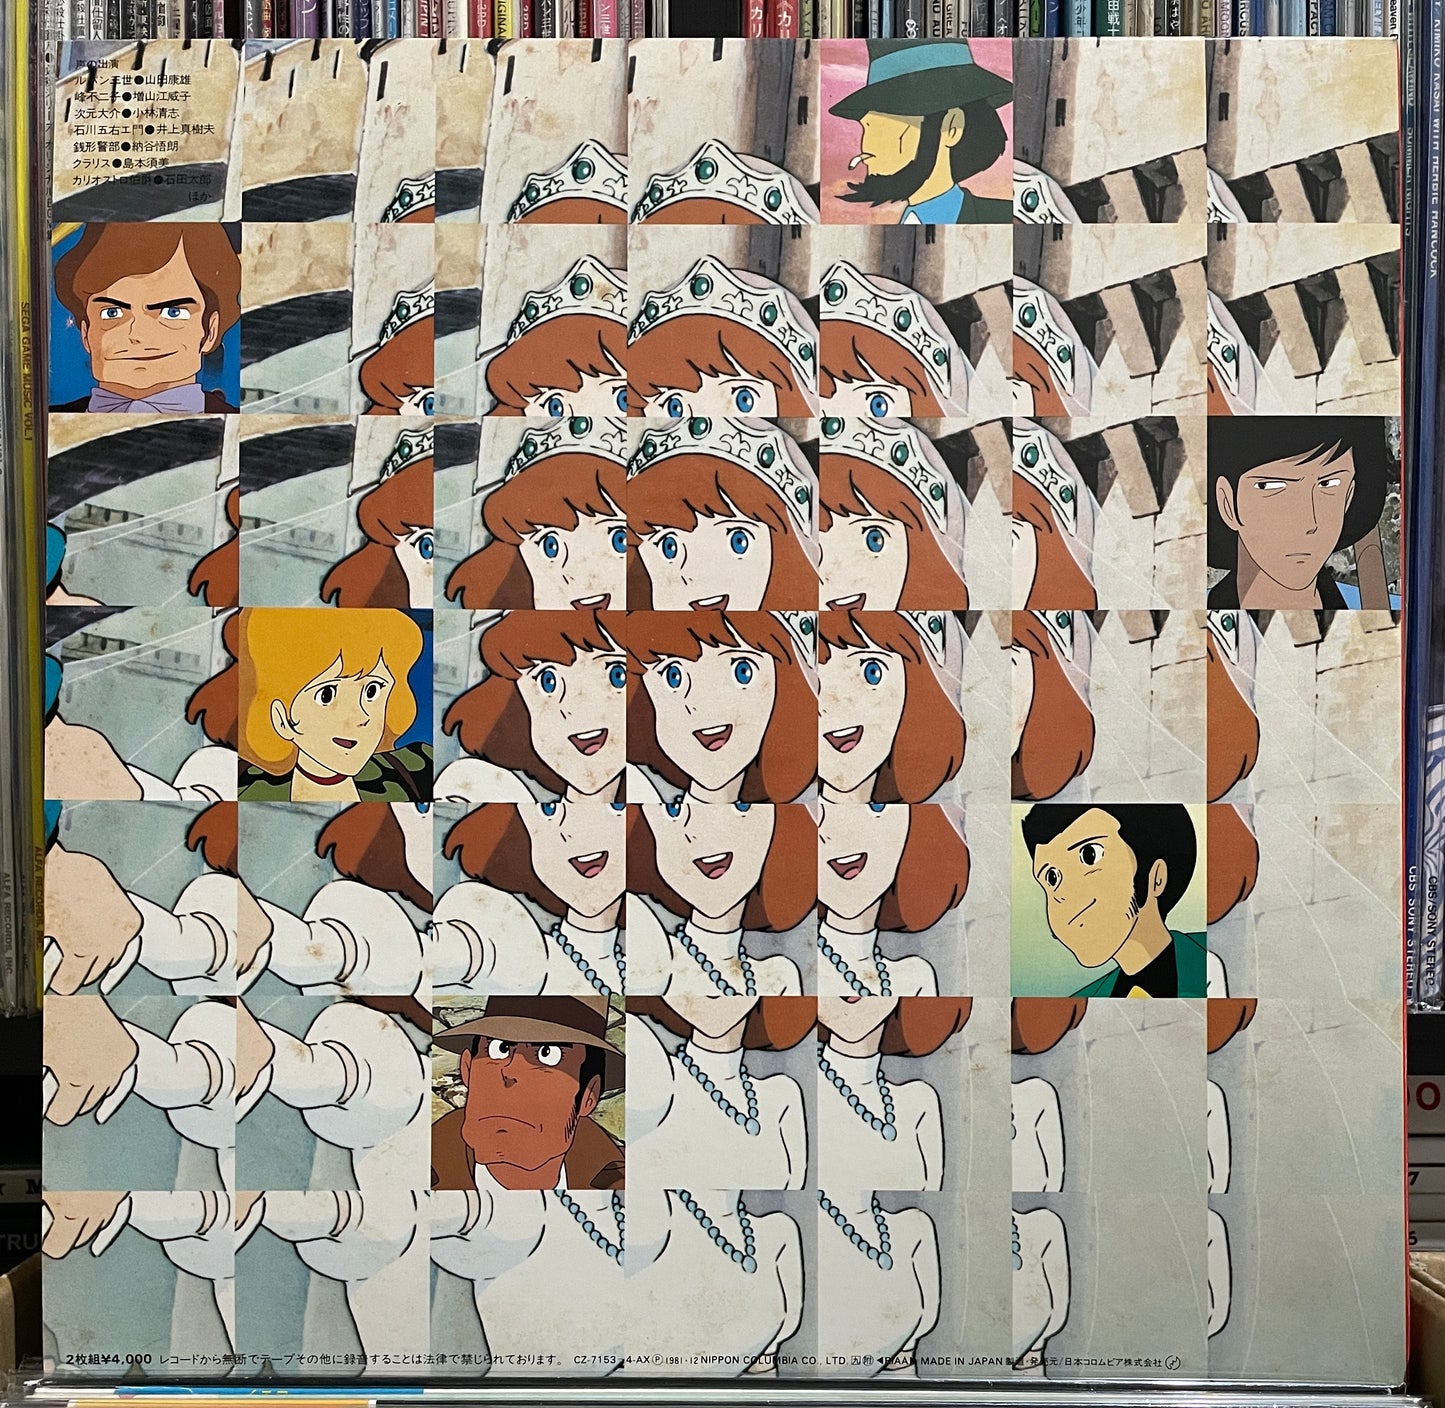 Yuji Ohno (You & The Explosion Band) “Lupin The 3rd - Castle Of Cagliostro” OST (1981)